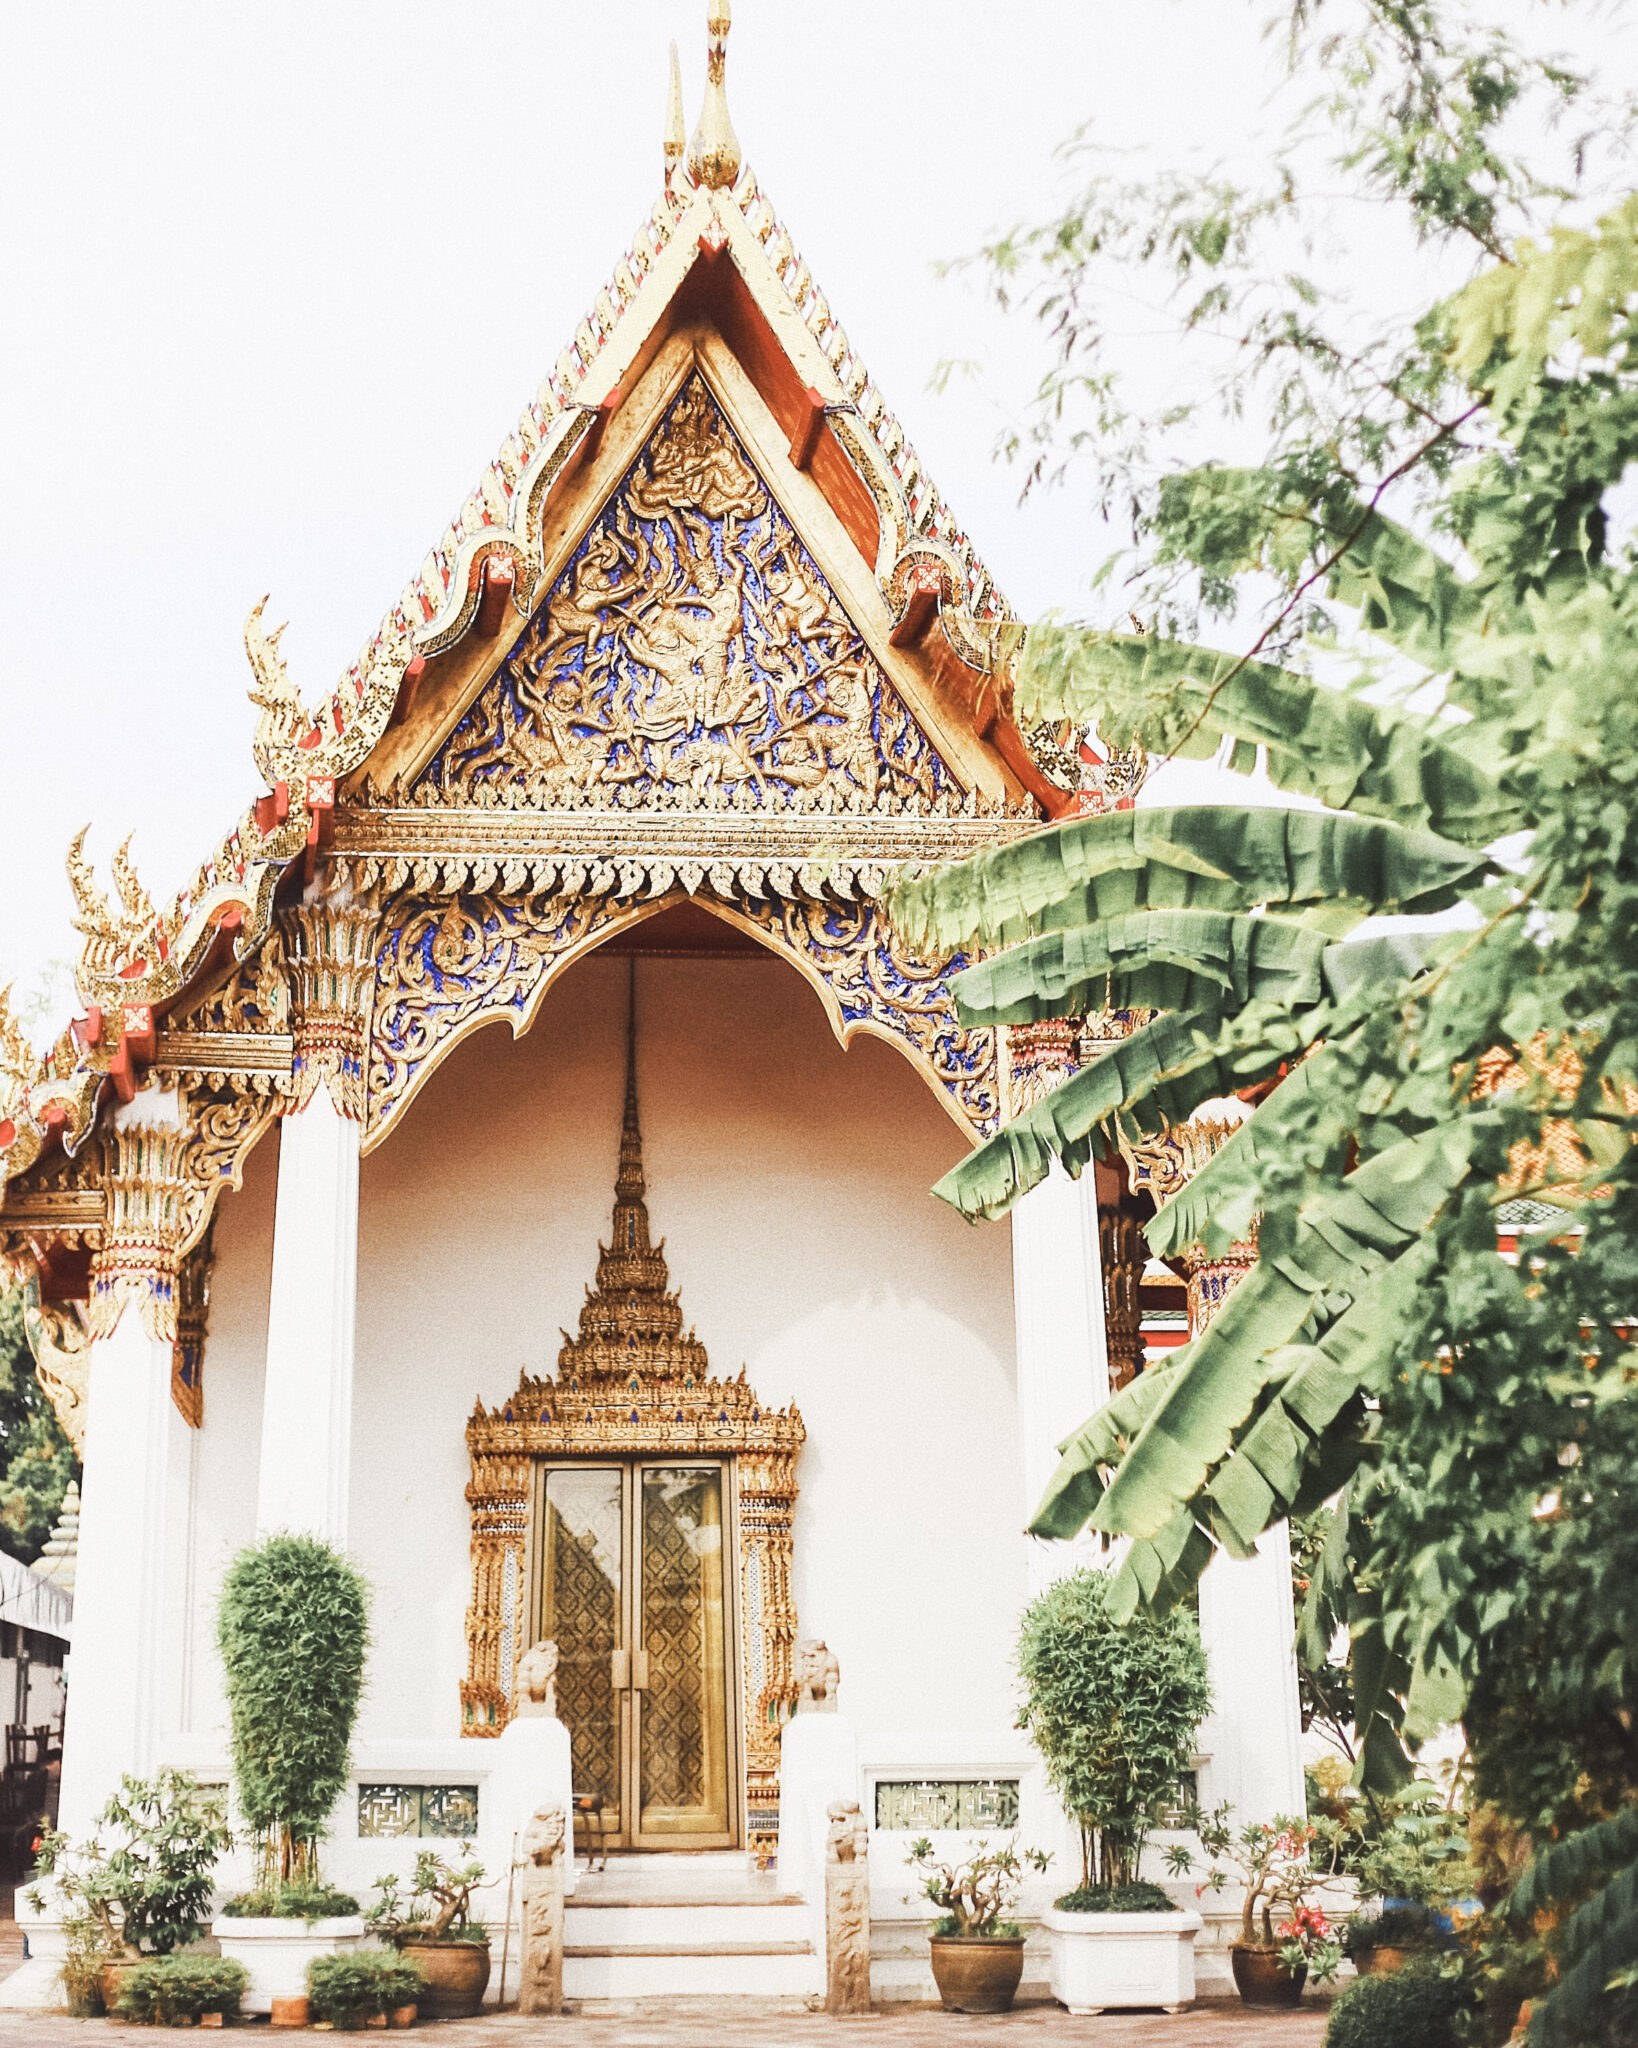 Dream Escape: Family-Friendly Things to Do in Thailand